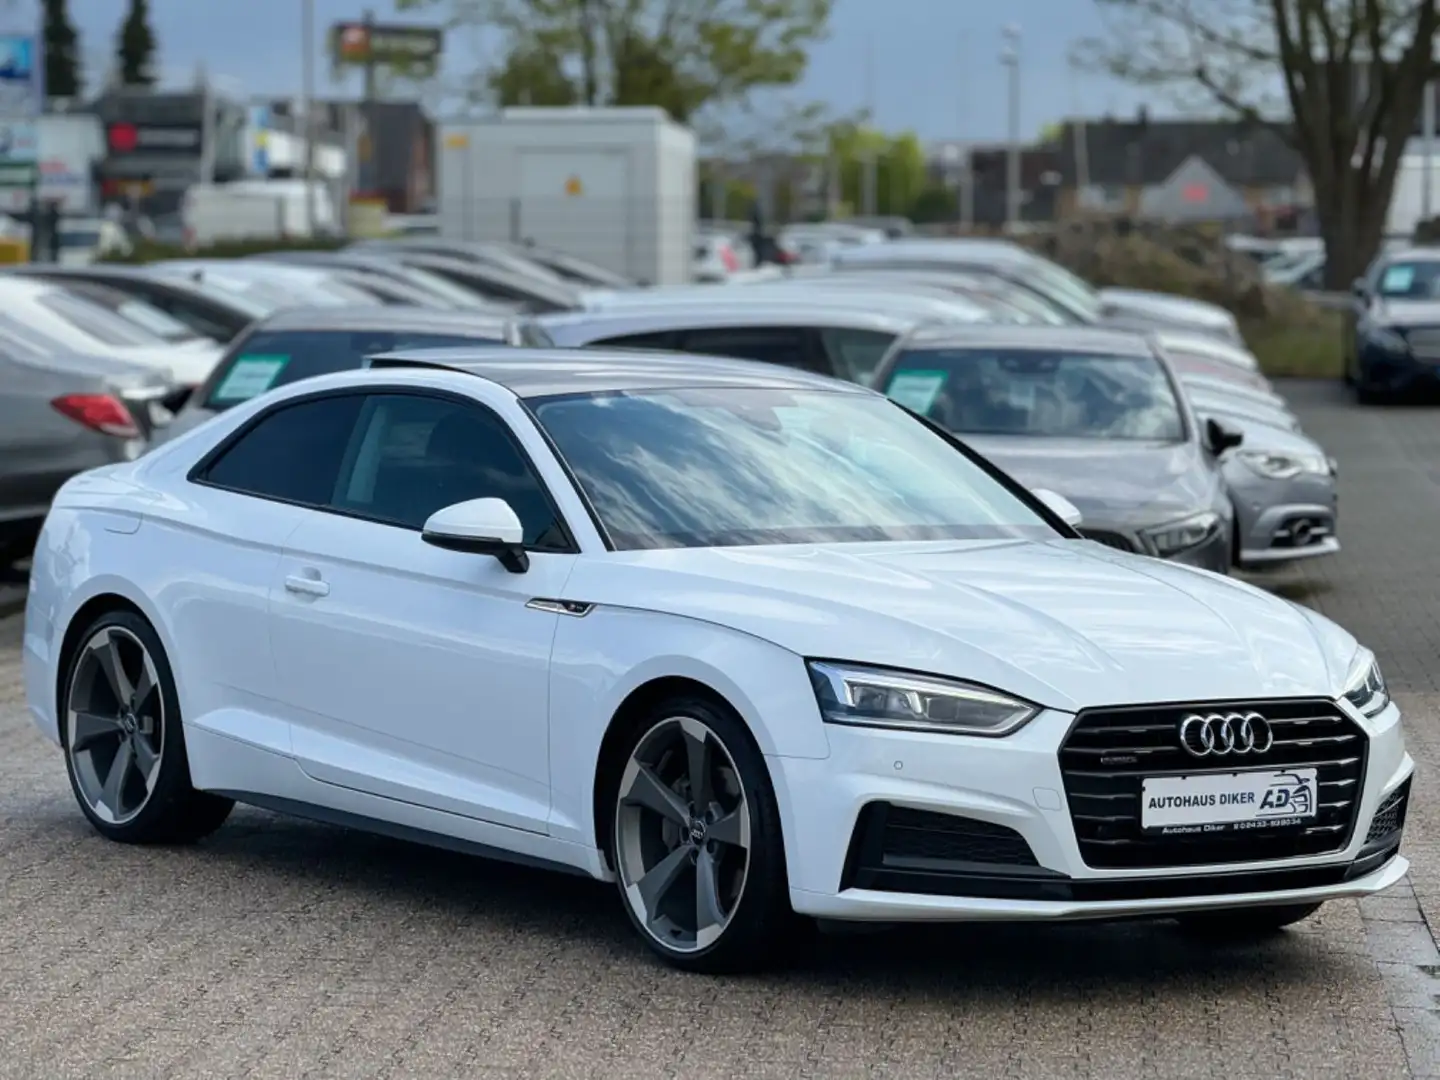 Audi A5 Coupe 2.0 TDI quattro S line Pano, 20"Rotor Wit - 2